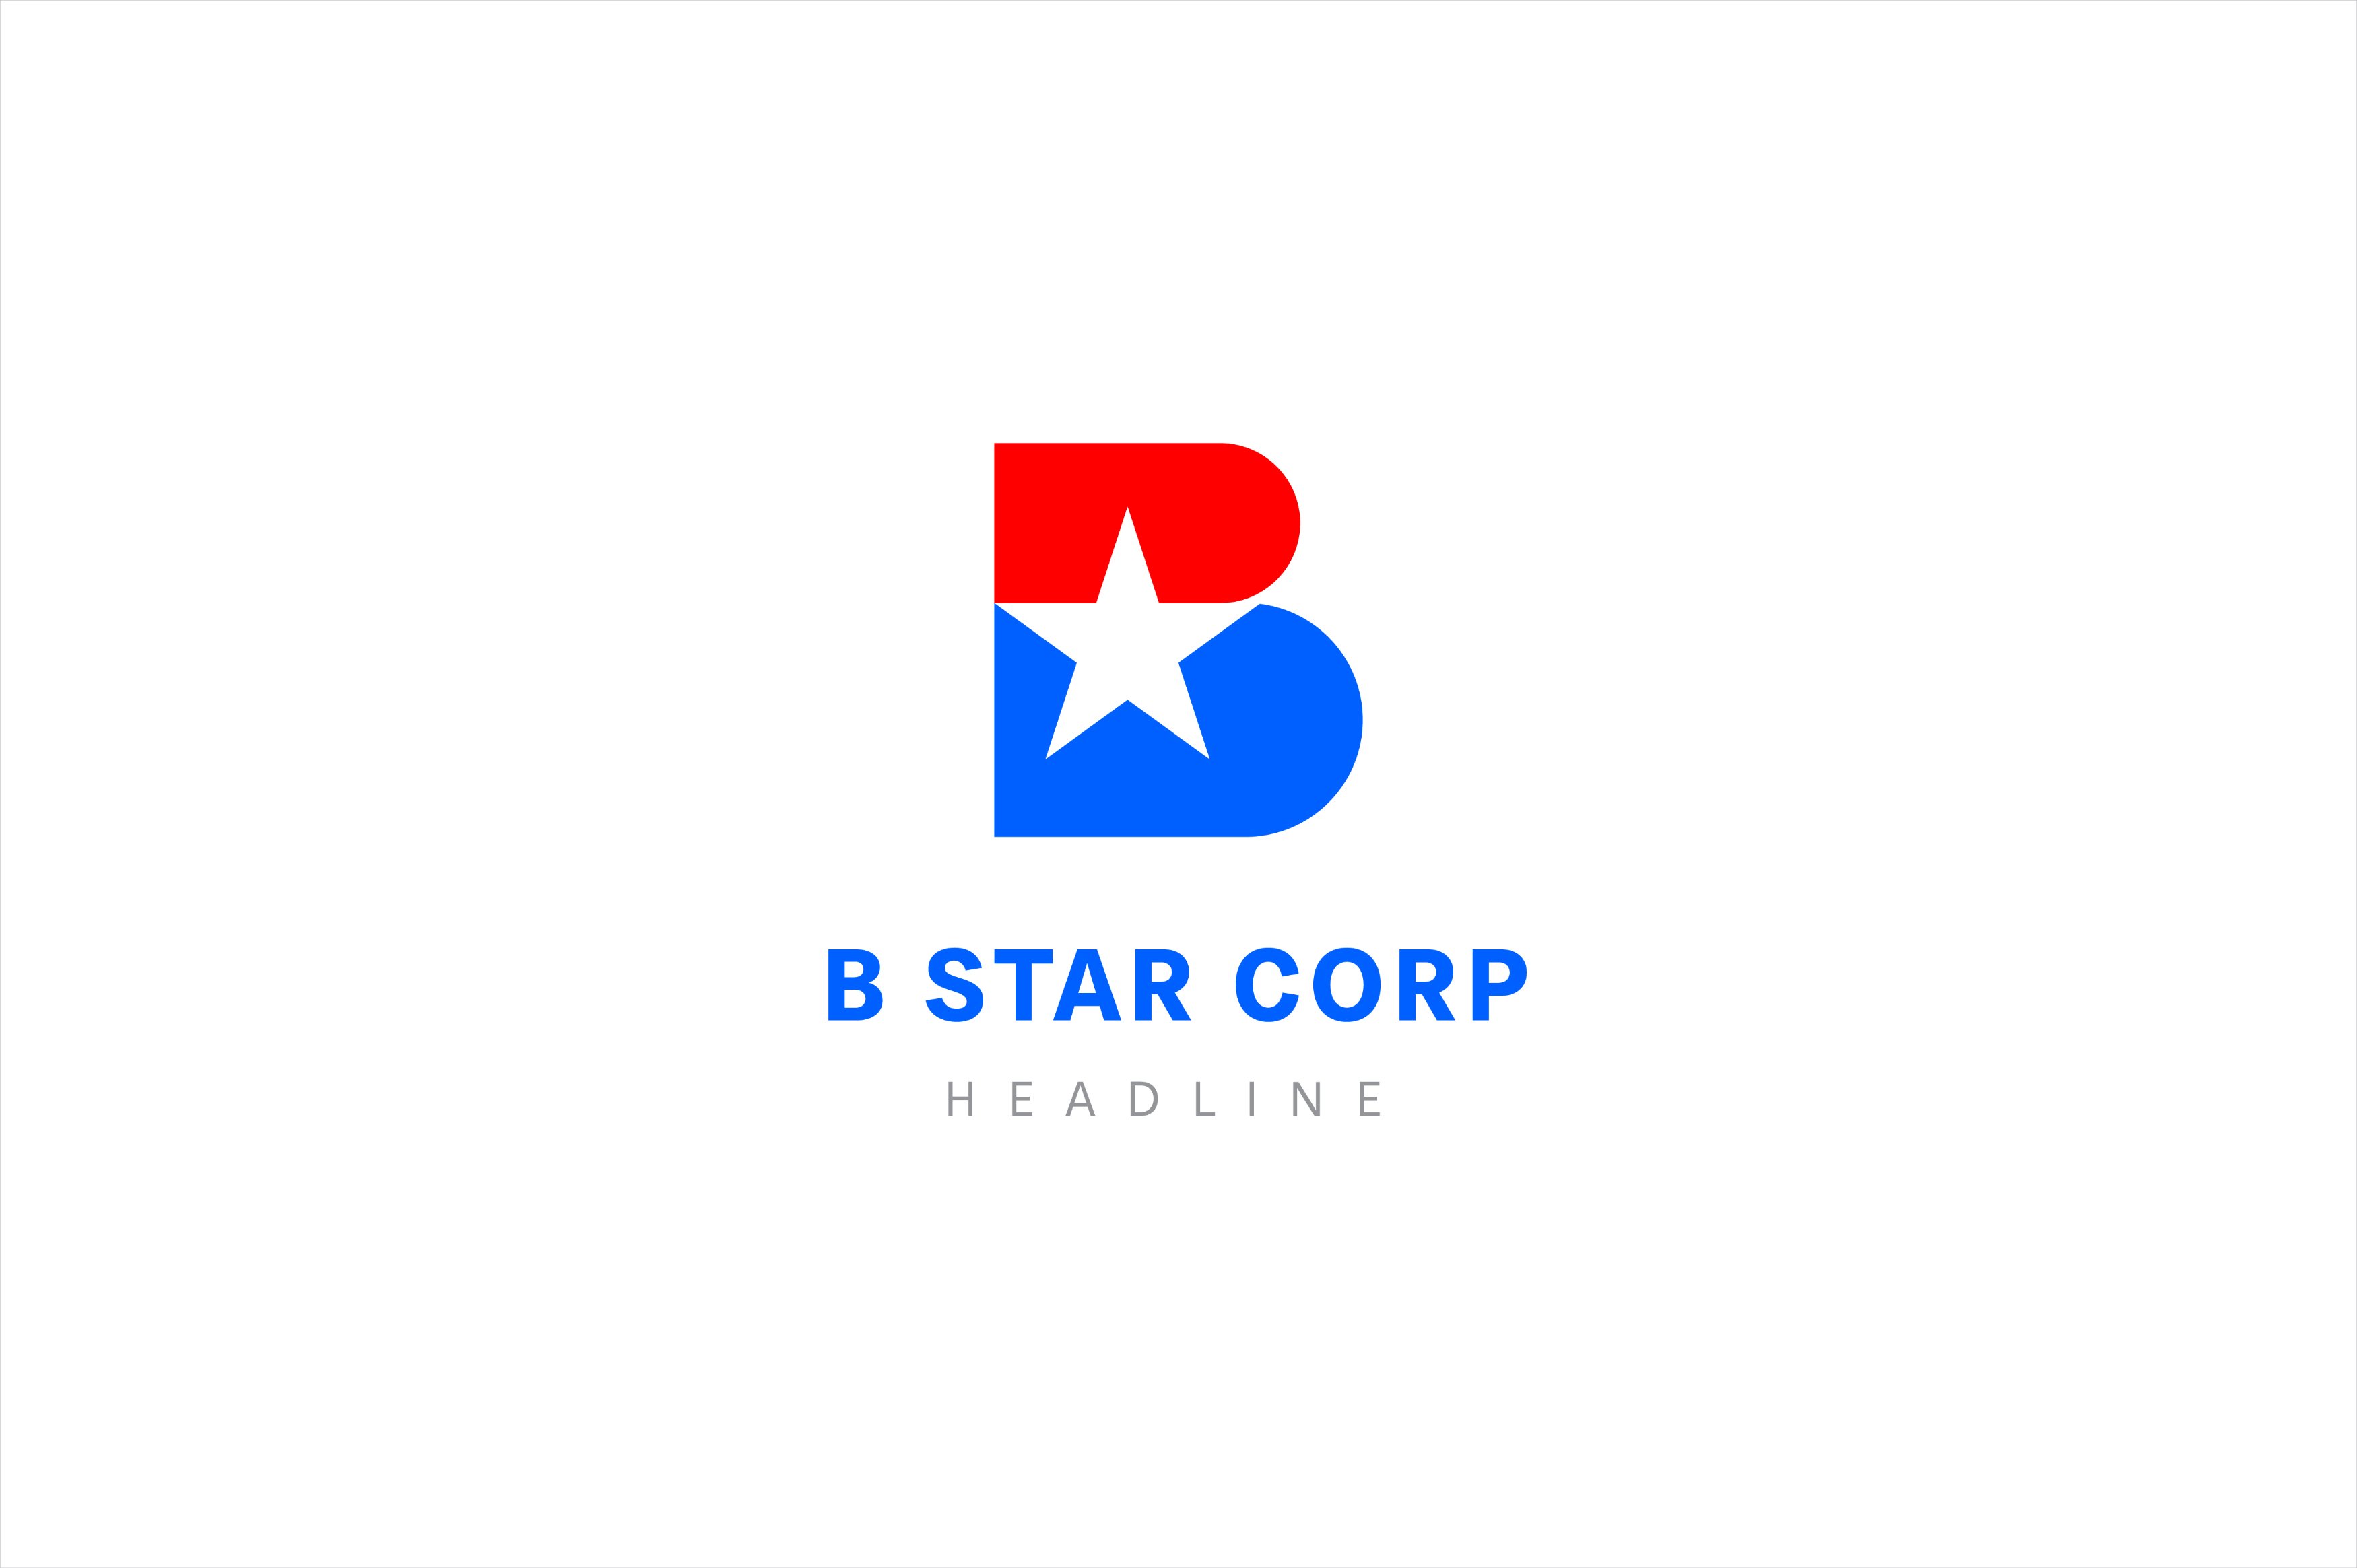 B star logo template. cover image.